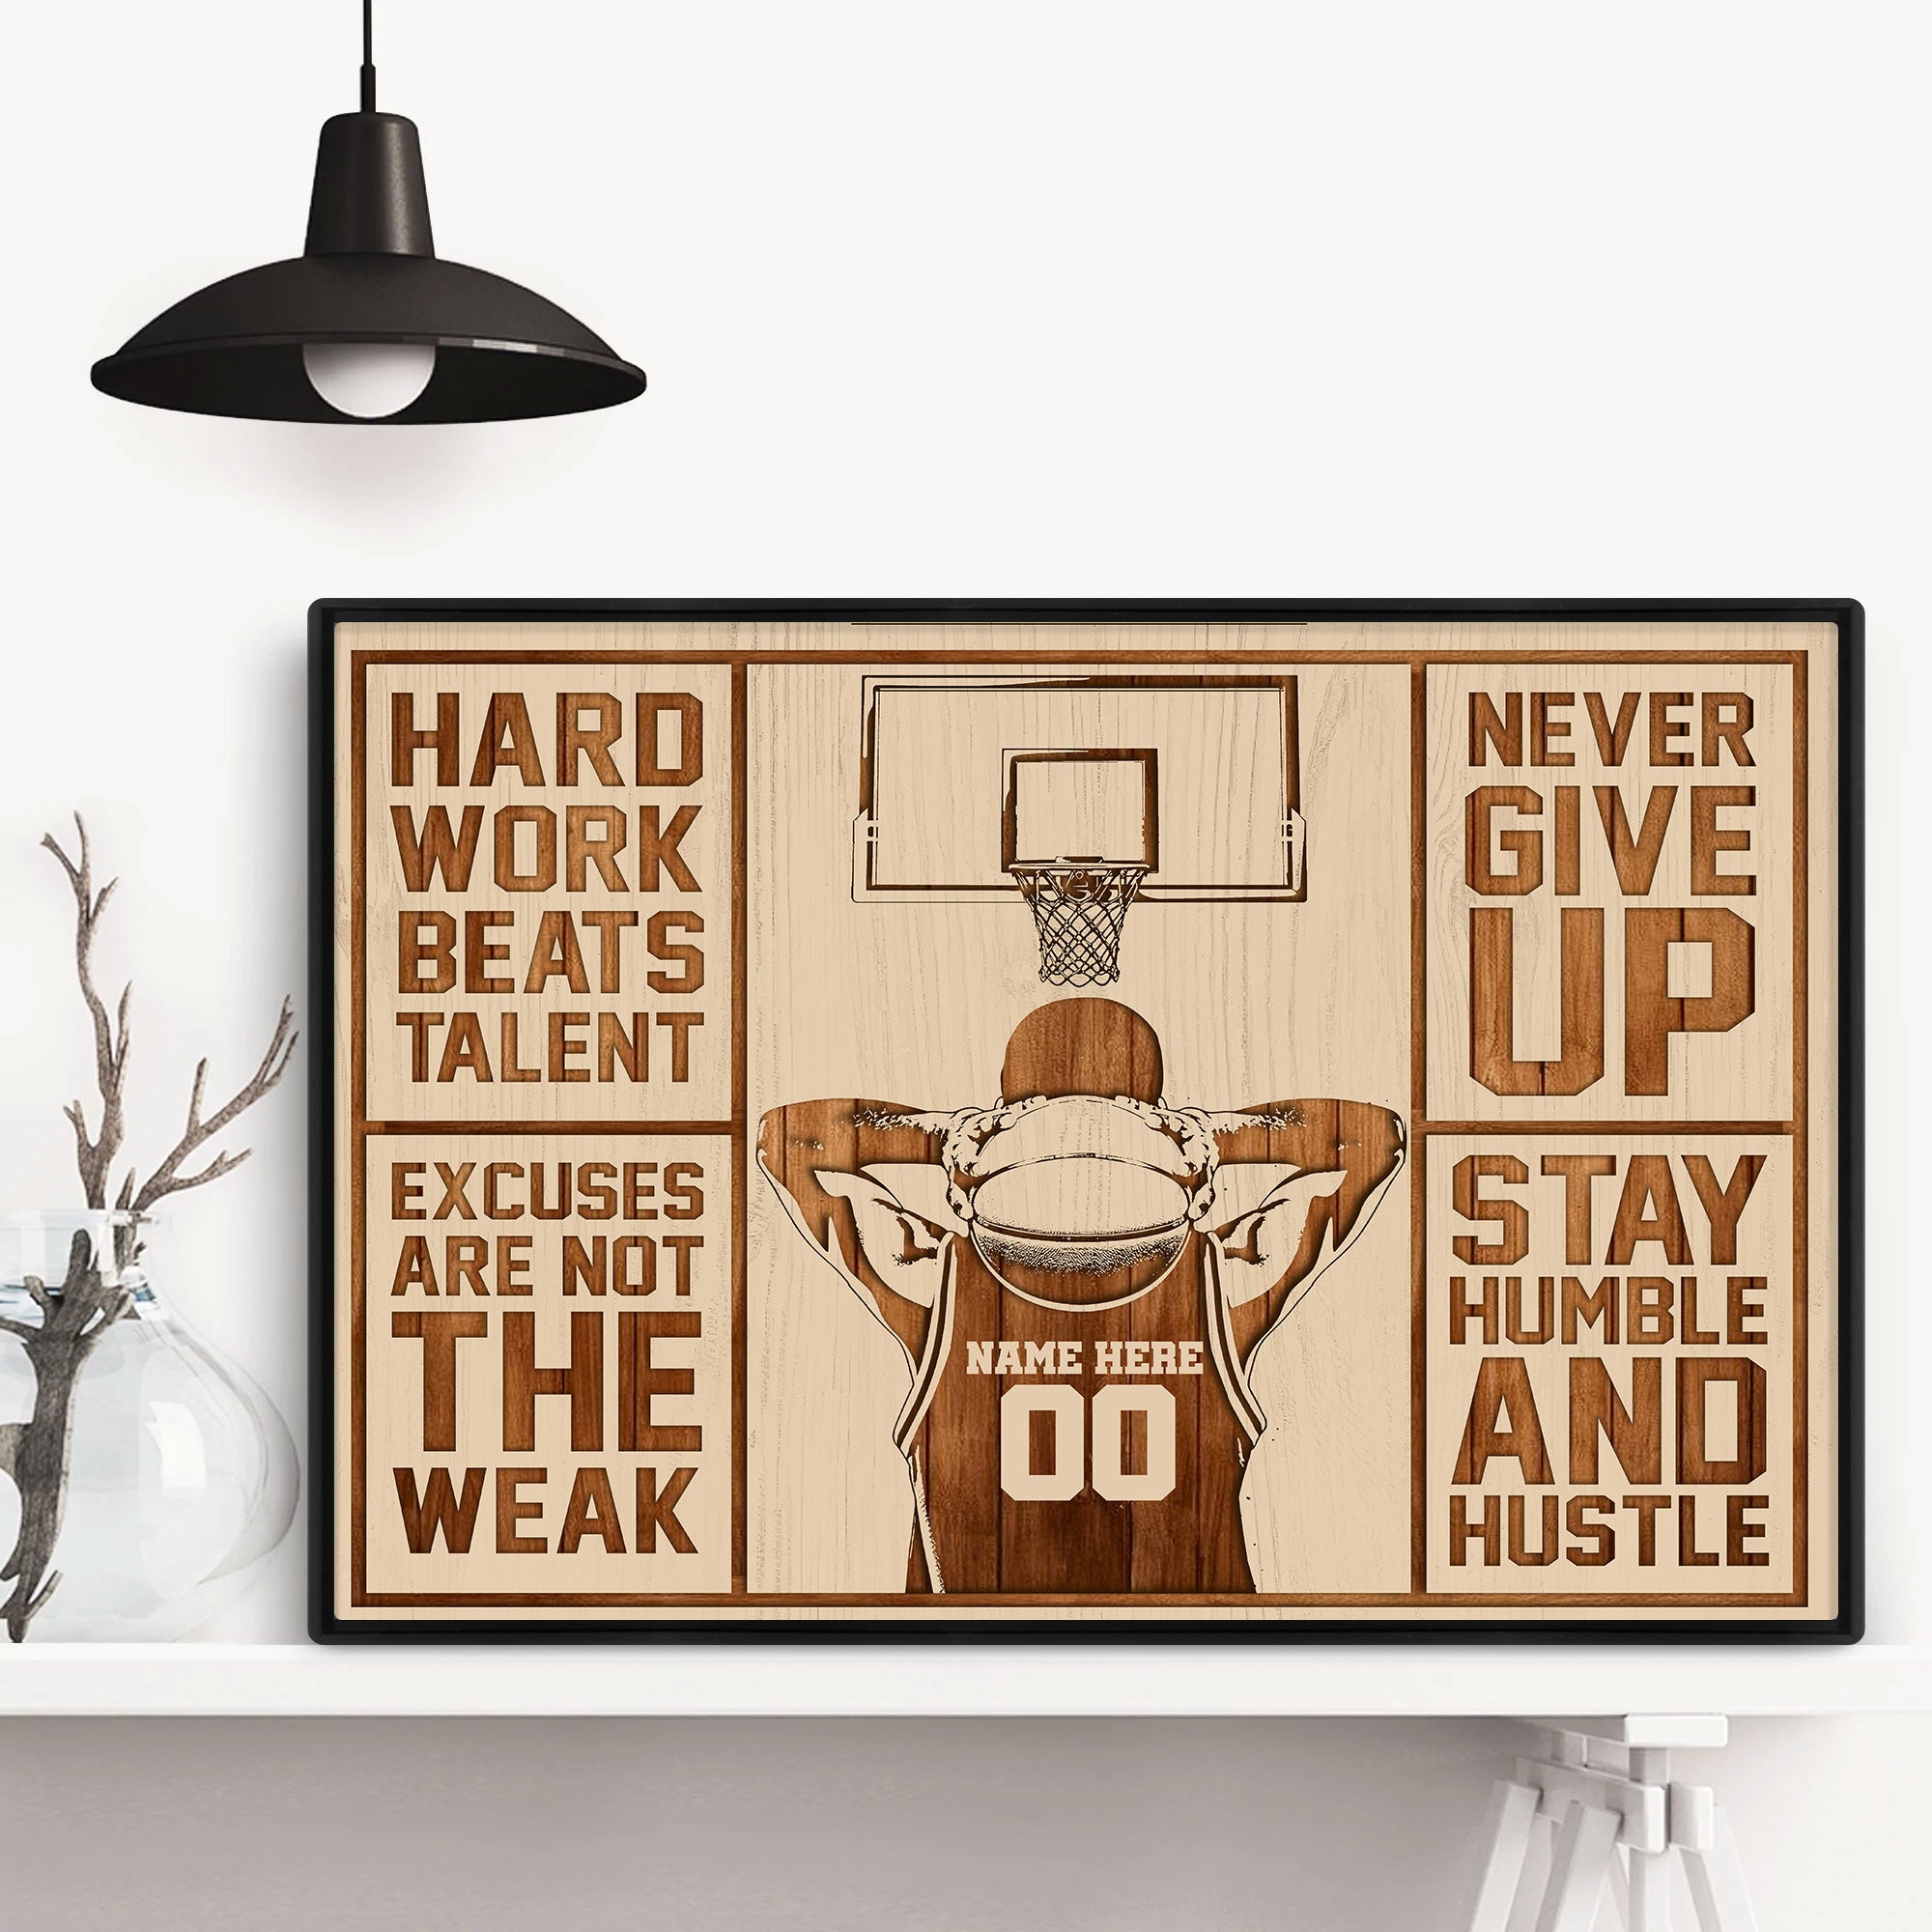 never give up basketball quotes